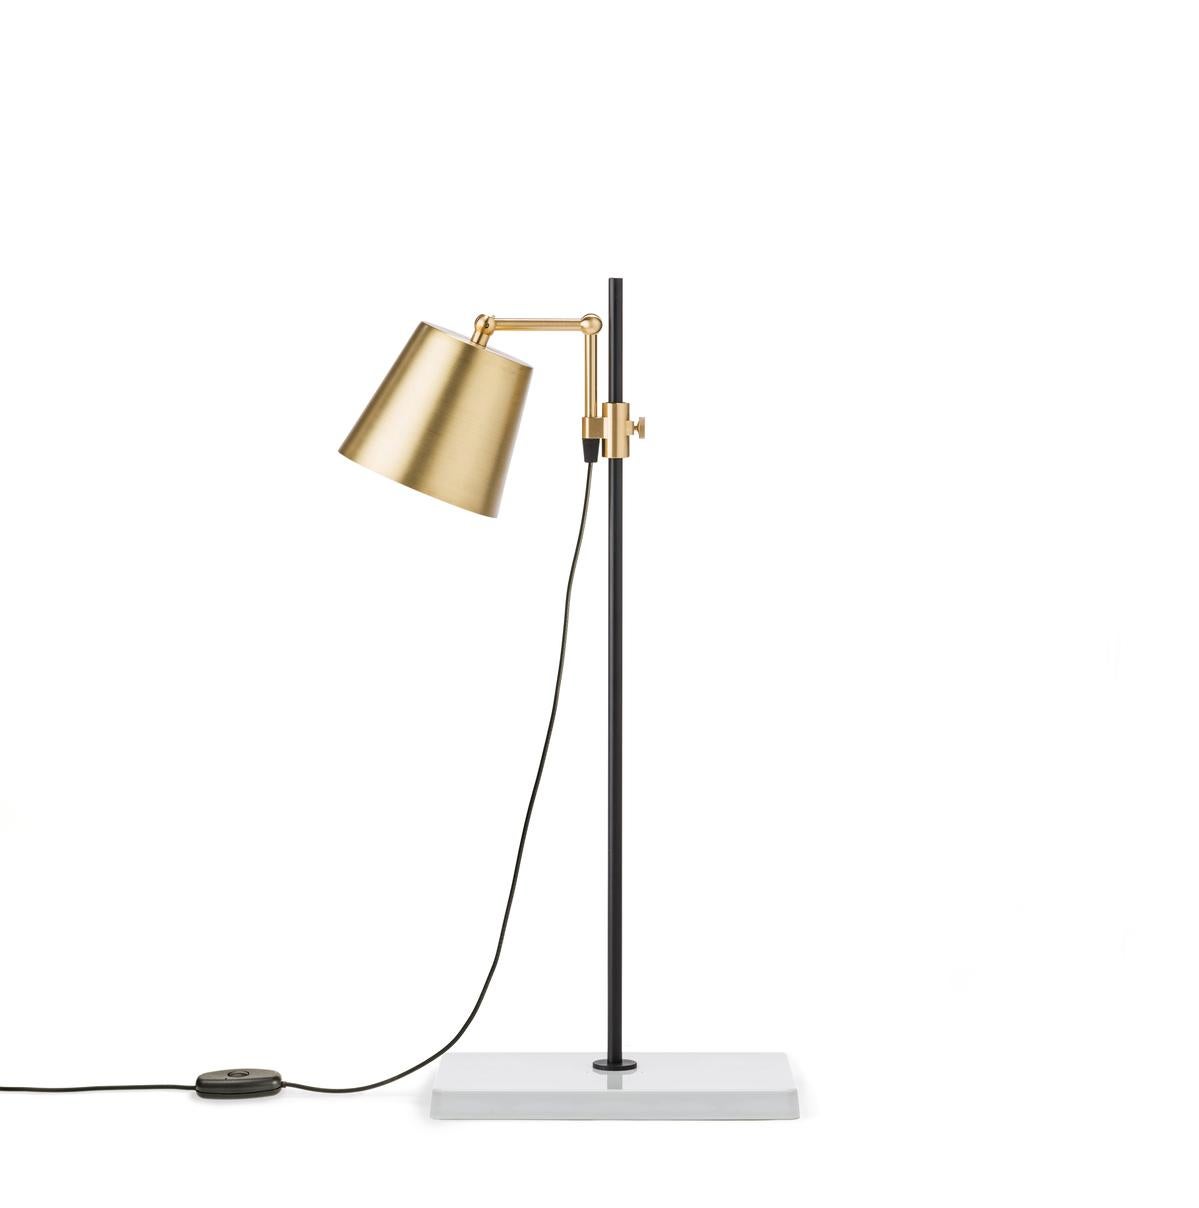 Table lamp designed by Anatomy design in 2010. 

The Lab light design came about from a genuine fascination with laboratory equipment and with all those fantastic clamps and levers — the perfect place to start designing a multi-functional